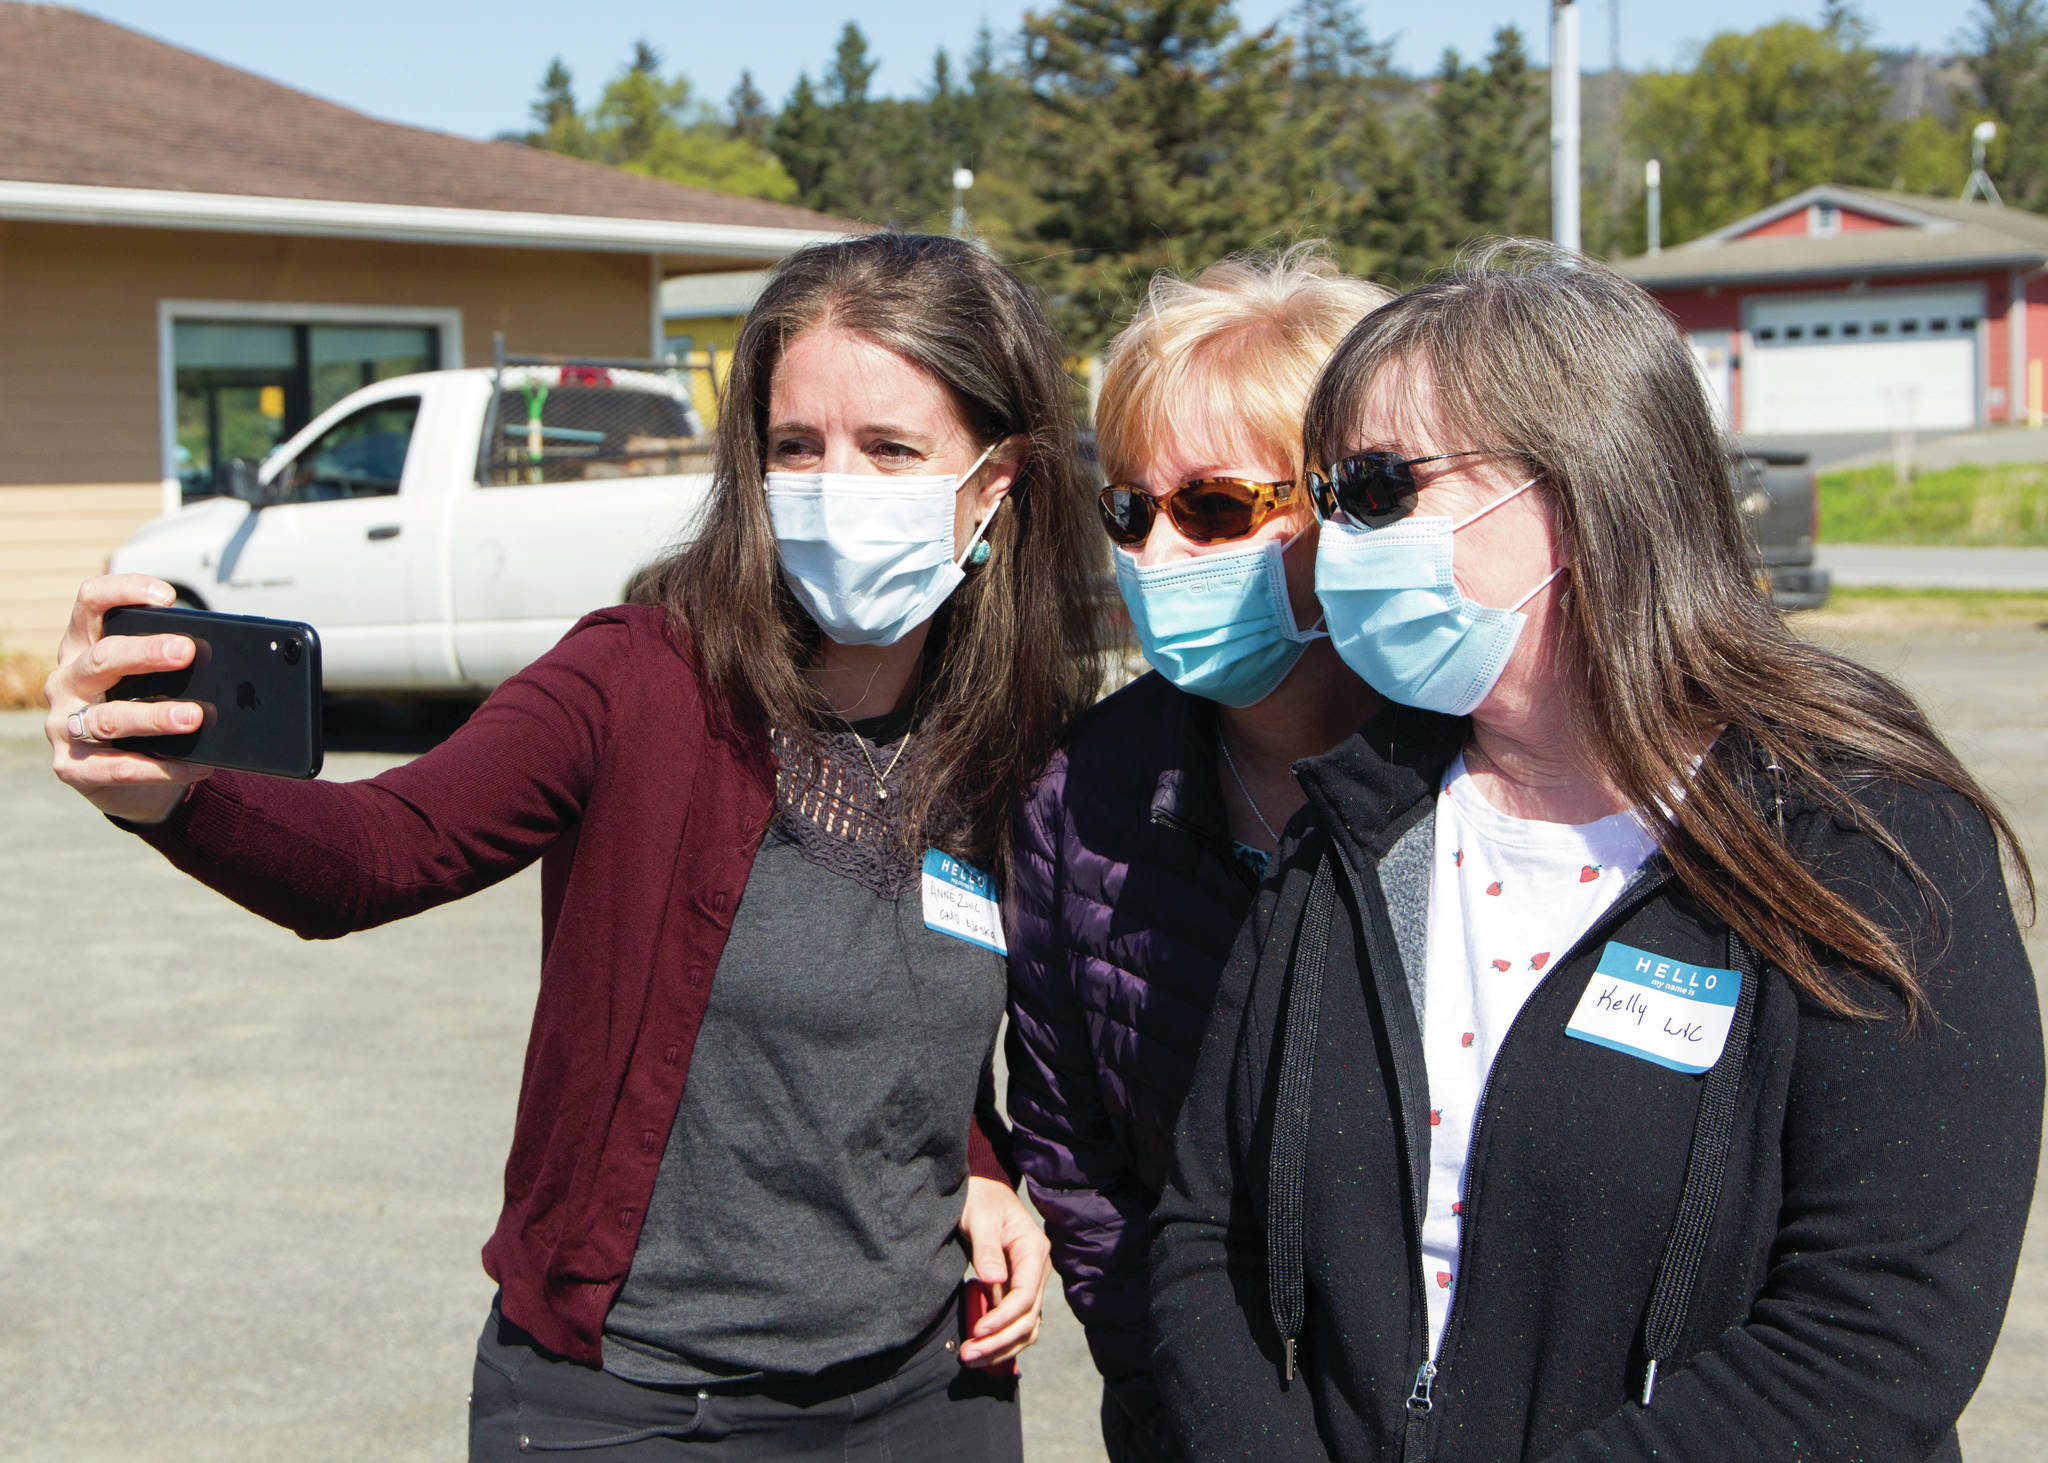 Alaska Chief Medical Officer Anne Zink, M.D., left, poses for a selfie with Kelly Bolt, right, and Debbie Gardner, center, who work at WIC, at a meet-and-greet on Thursday, May 27, 2021, at the Homer Public Health Center in Homer, Alaska. (Photo by Sarah Knapp/Homer News)